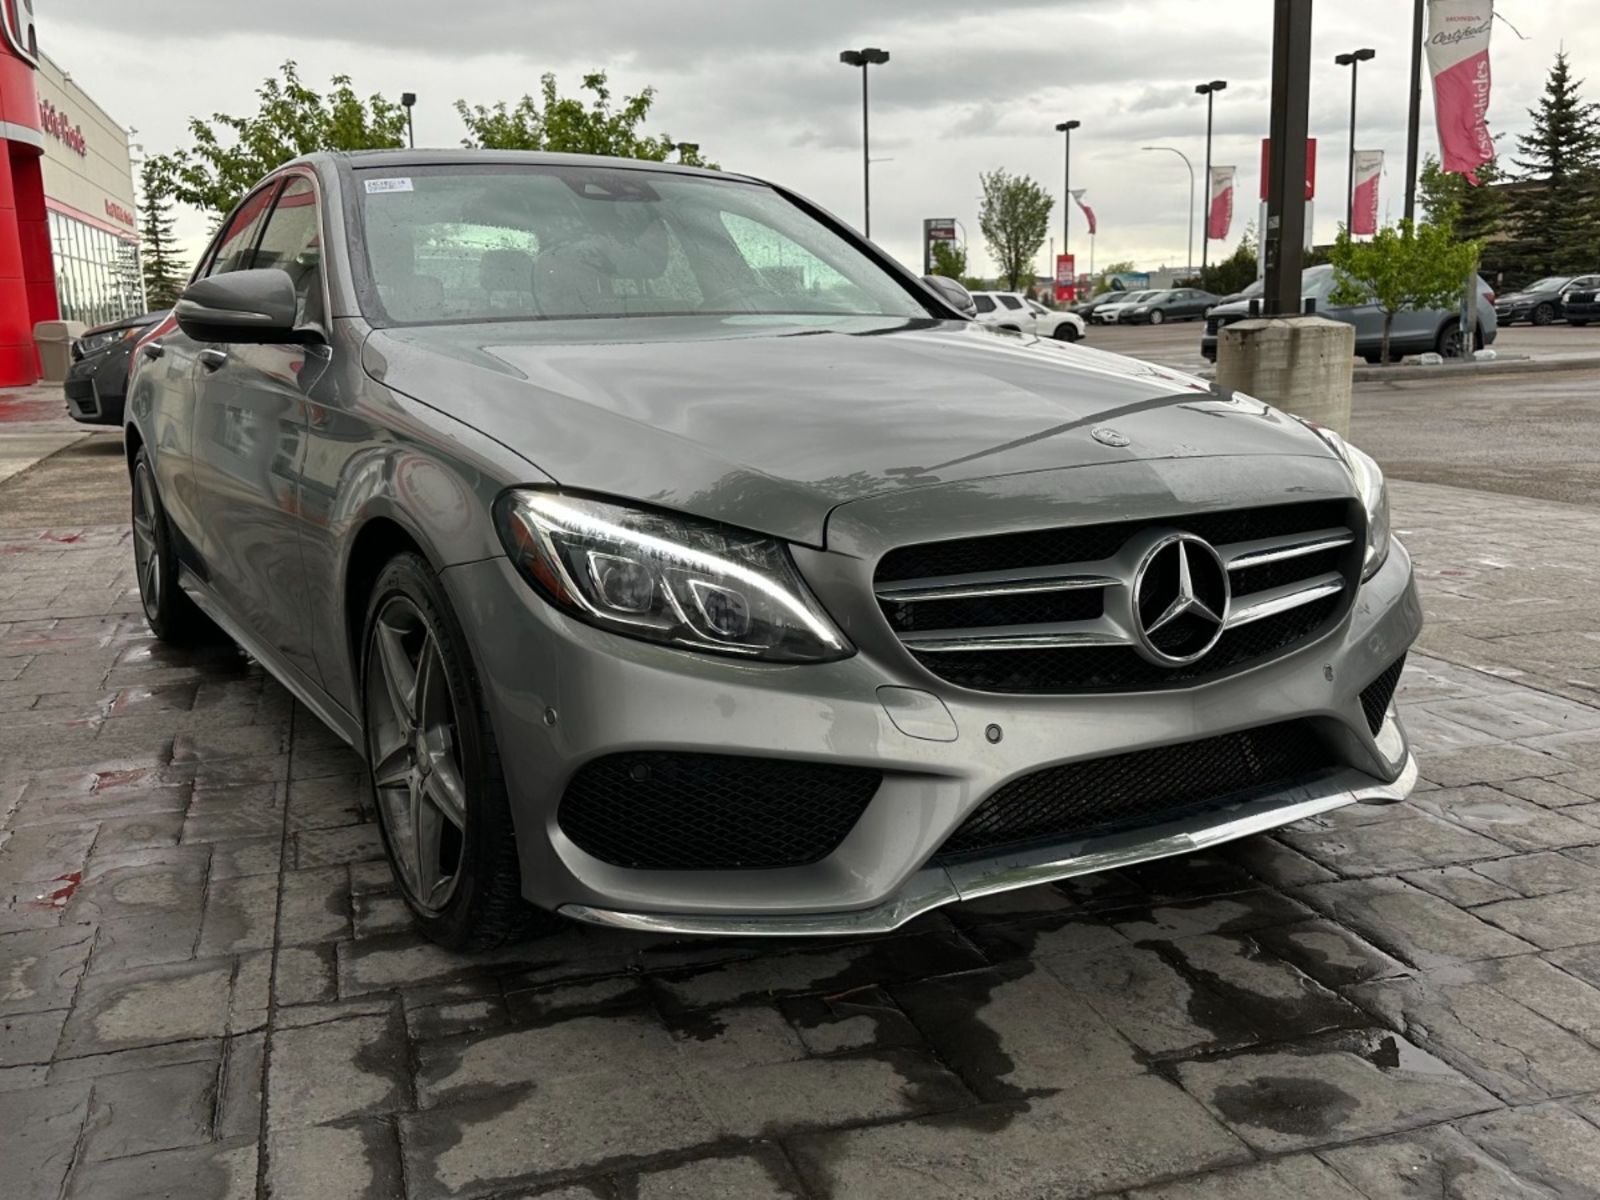 2015 Mercedes-Benz C-Class C300: No Accidents, Leather, Fully Loaded